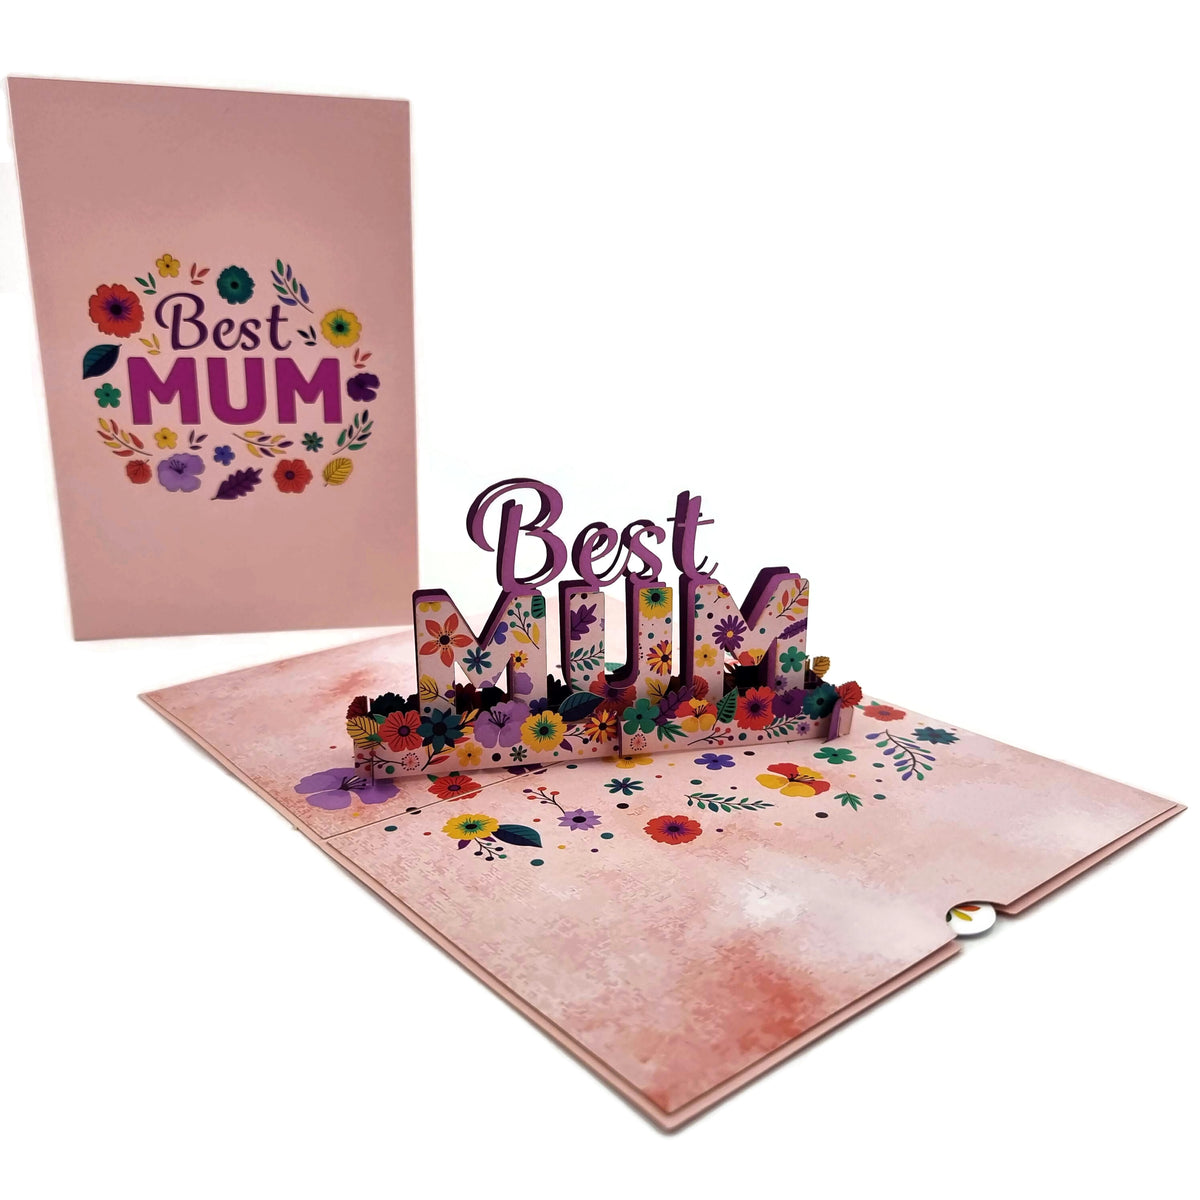 Why you should buy a Color Pop Card for mothers day